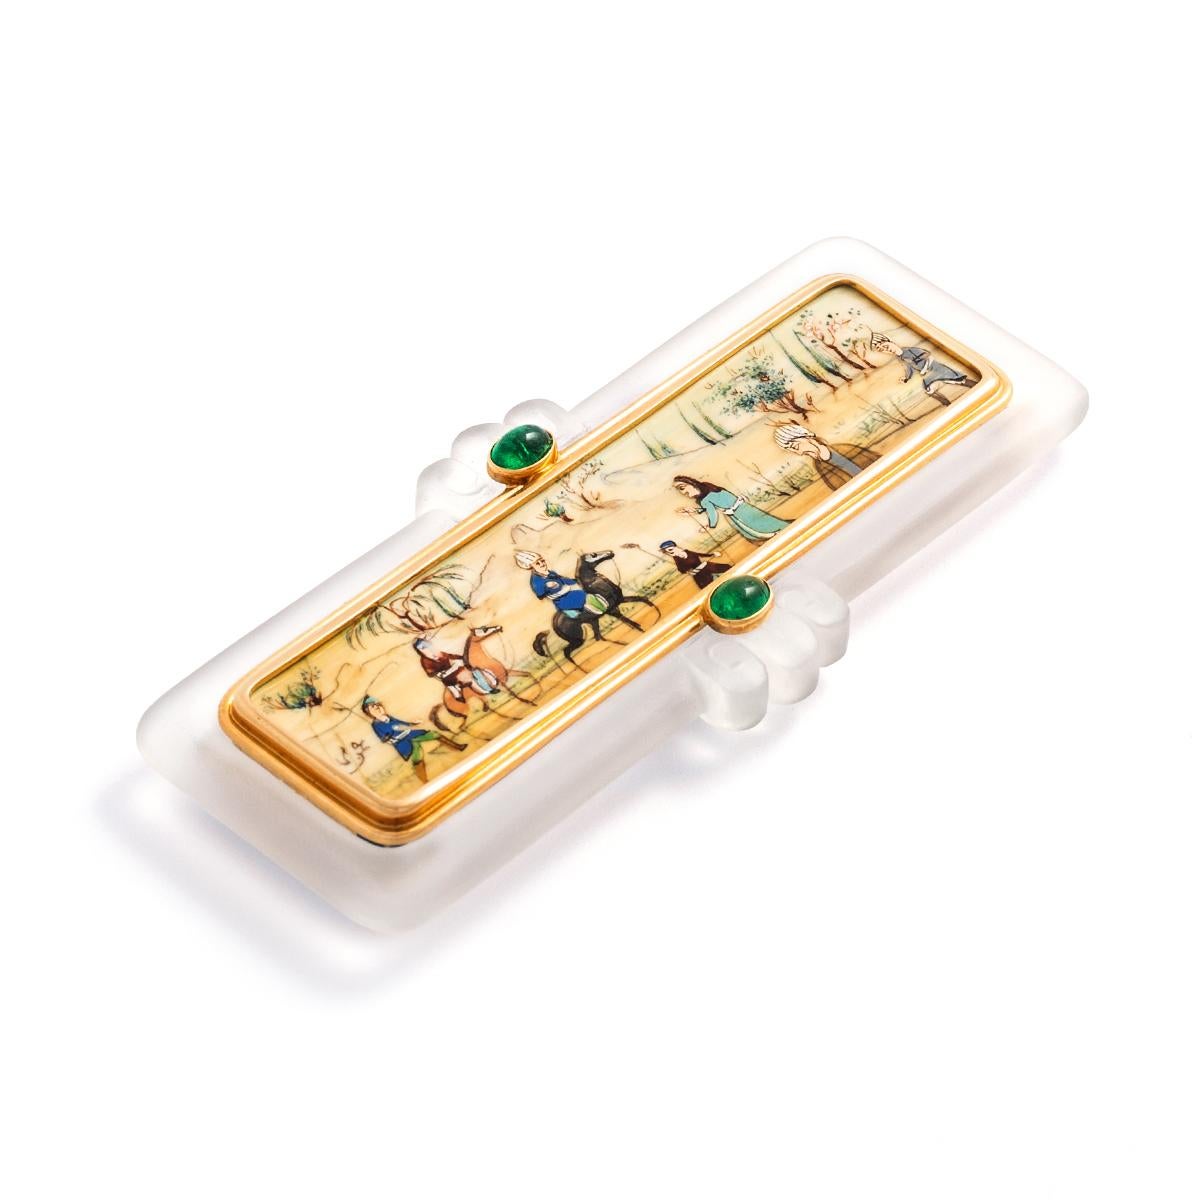 Ludwig Muller GENEVE.
Rock Cristal Cabochon Emerald Painting representing a Persian scene probably from Shahnameh (Poetry Book by Ferdowsi) mounted as a Brooch.
Signed Ludwig Muller GENEVE.
Width: 9.00 centimeters.
Height: 4.00 centimeters.
Gross